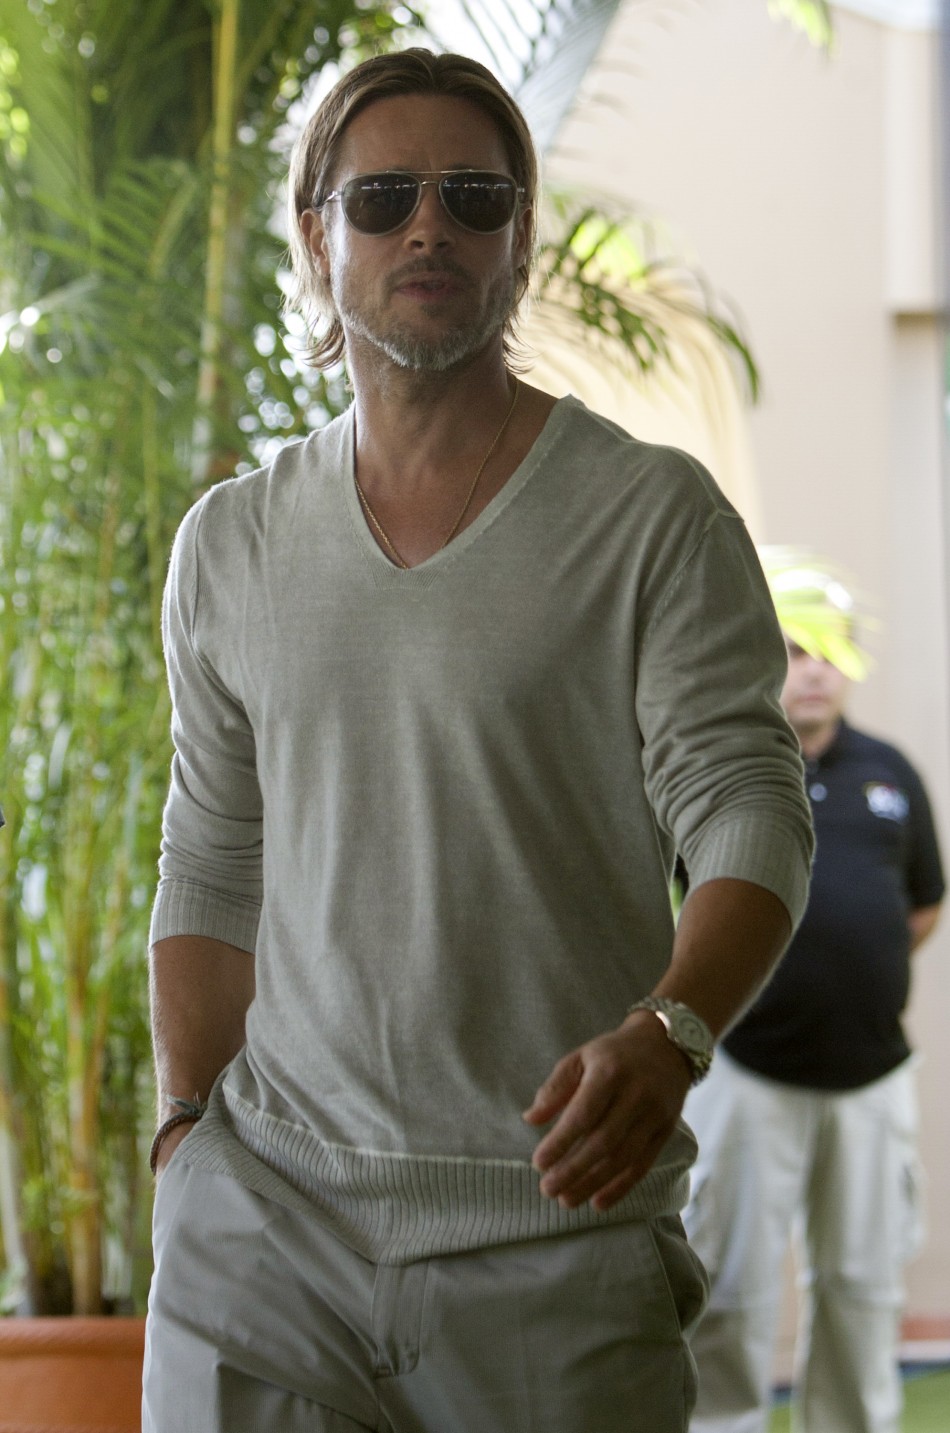 U.S. actor Brad Pitt poses during a photocall for his film quotMoneyballquot in Cancun